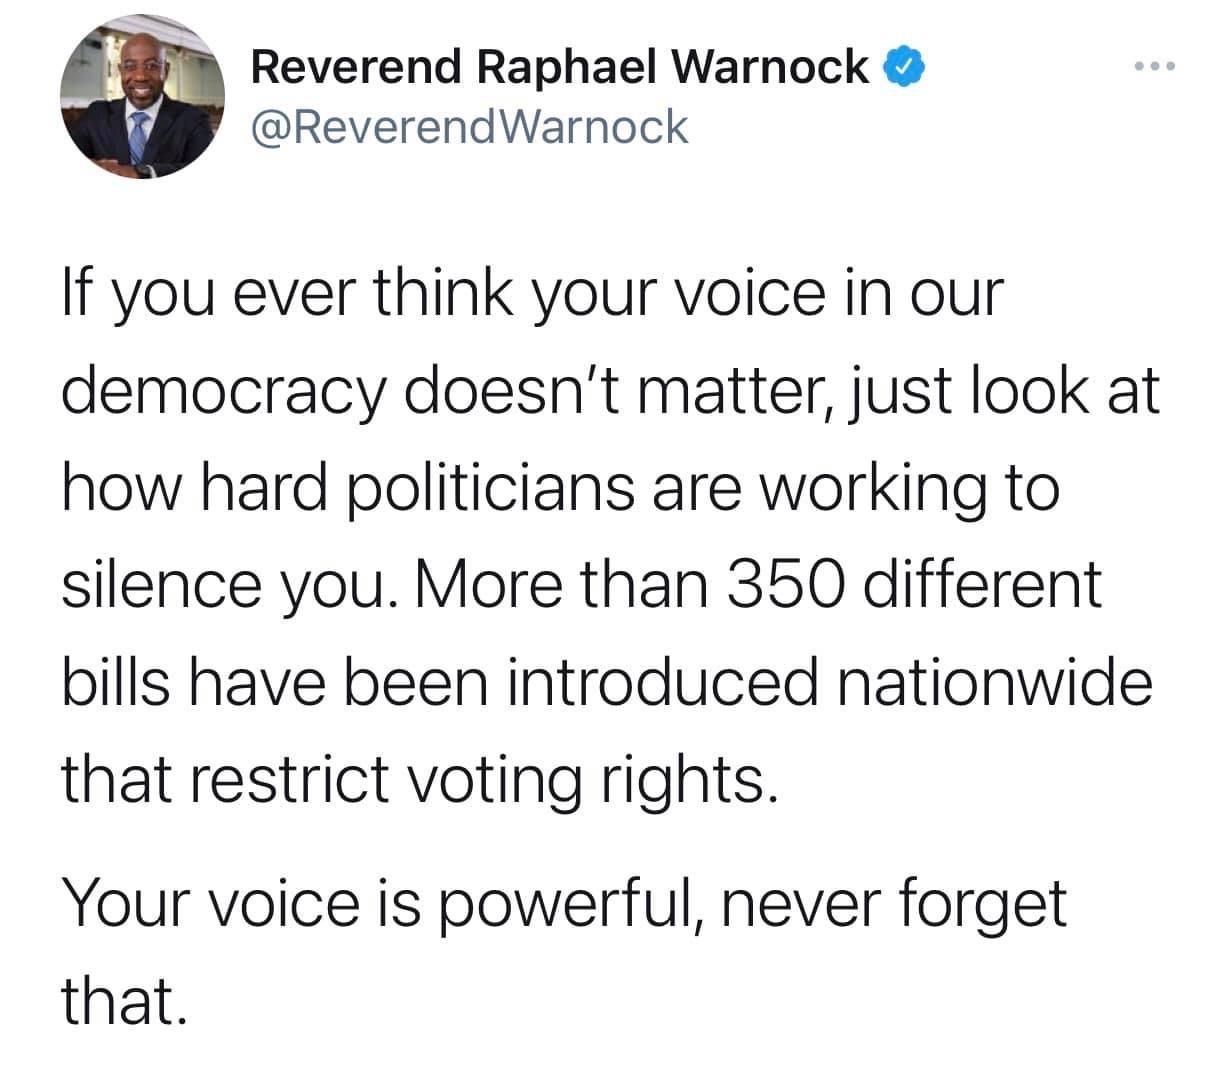 republicans don’t want you to vote BECAUSE your voice matters - meme